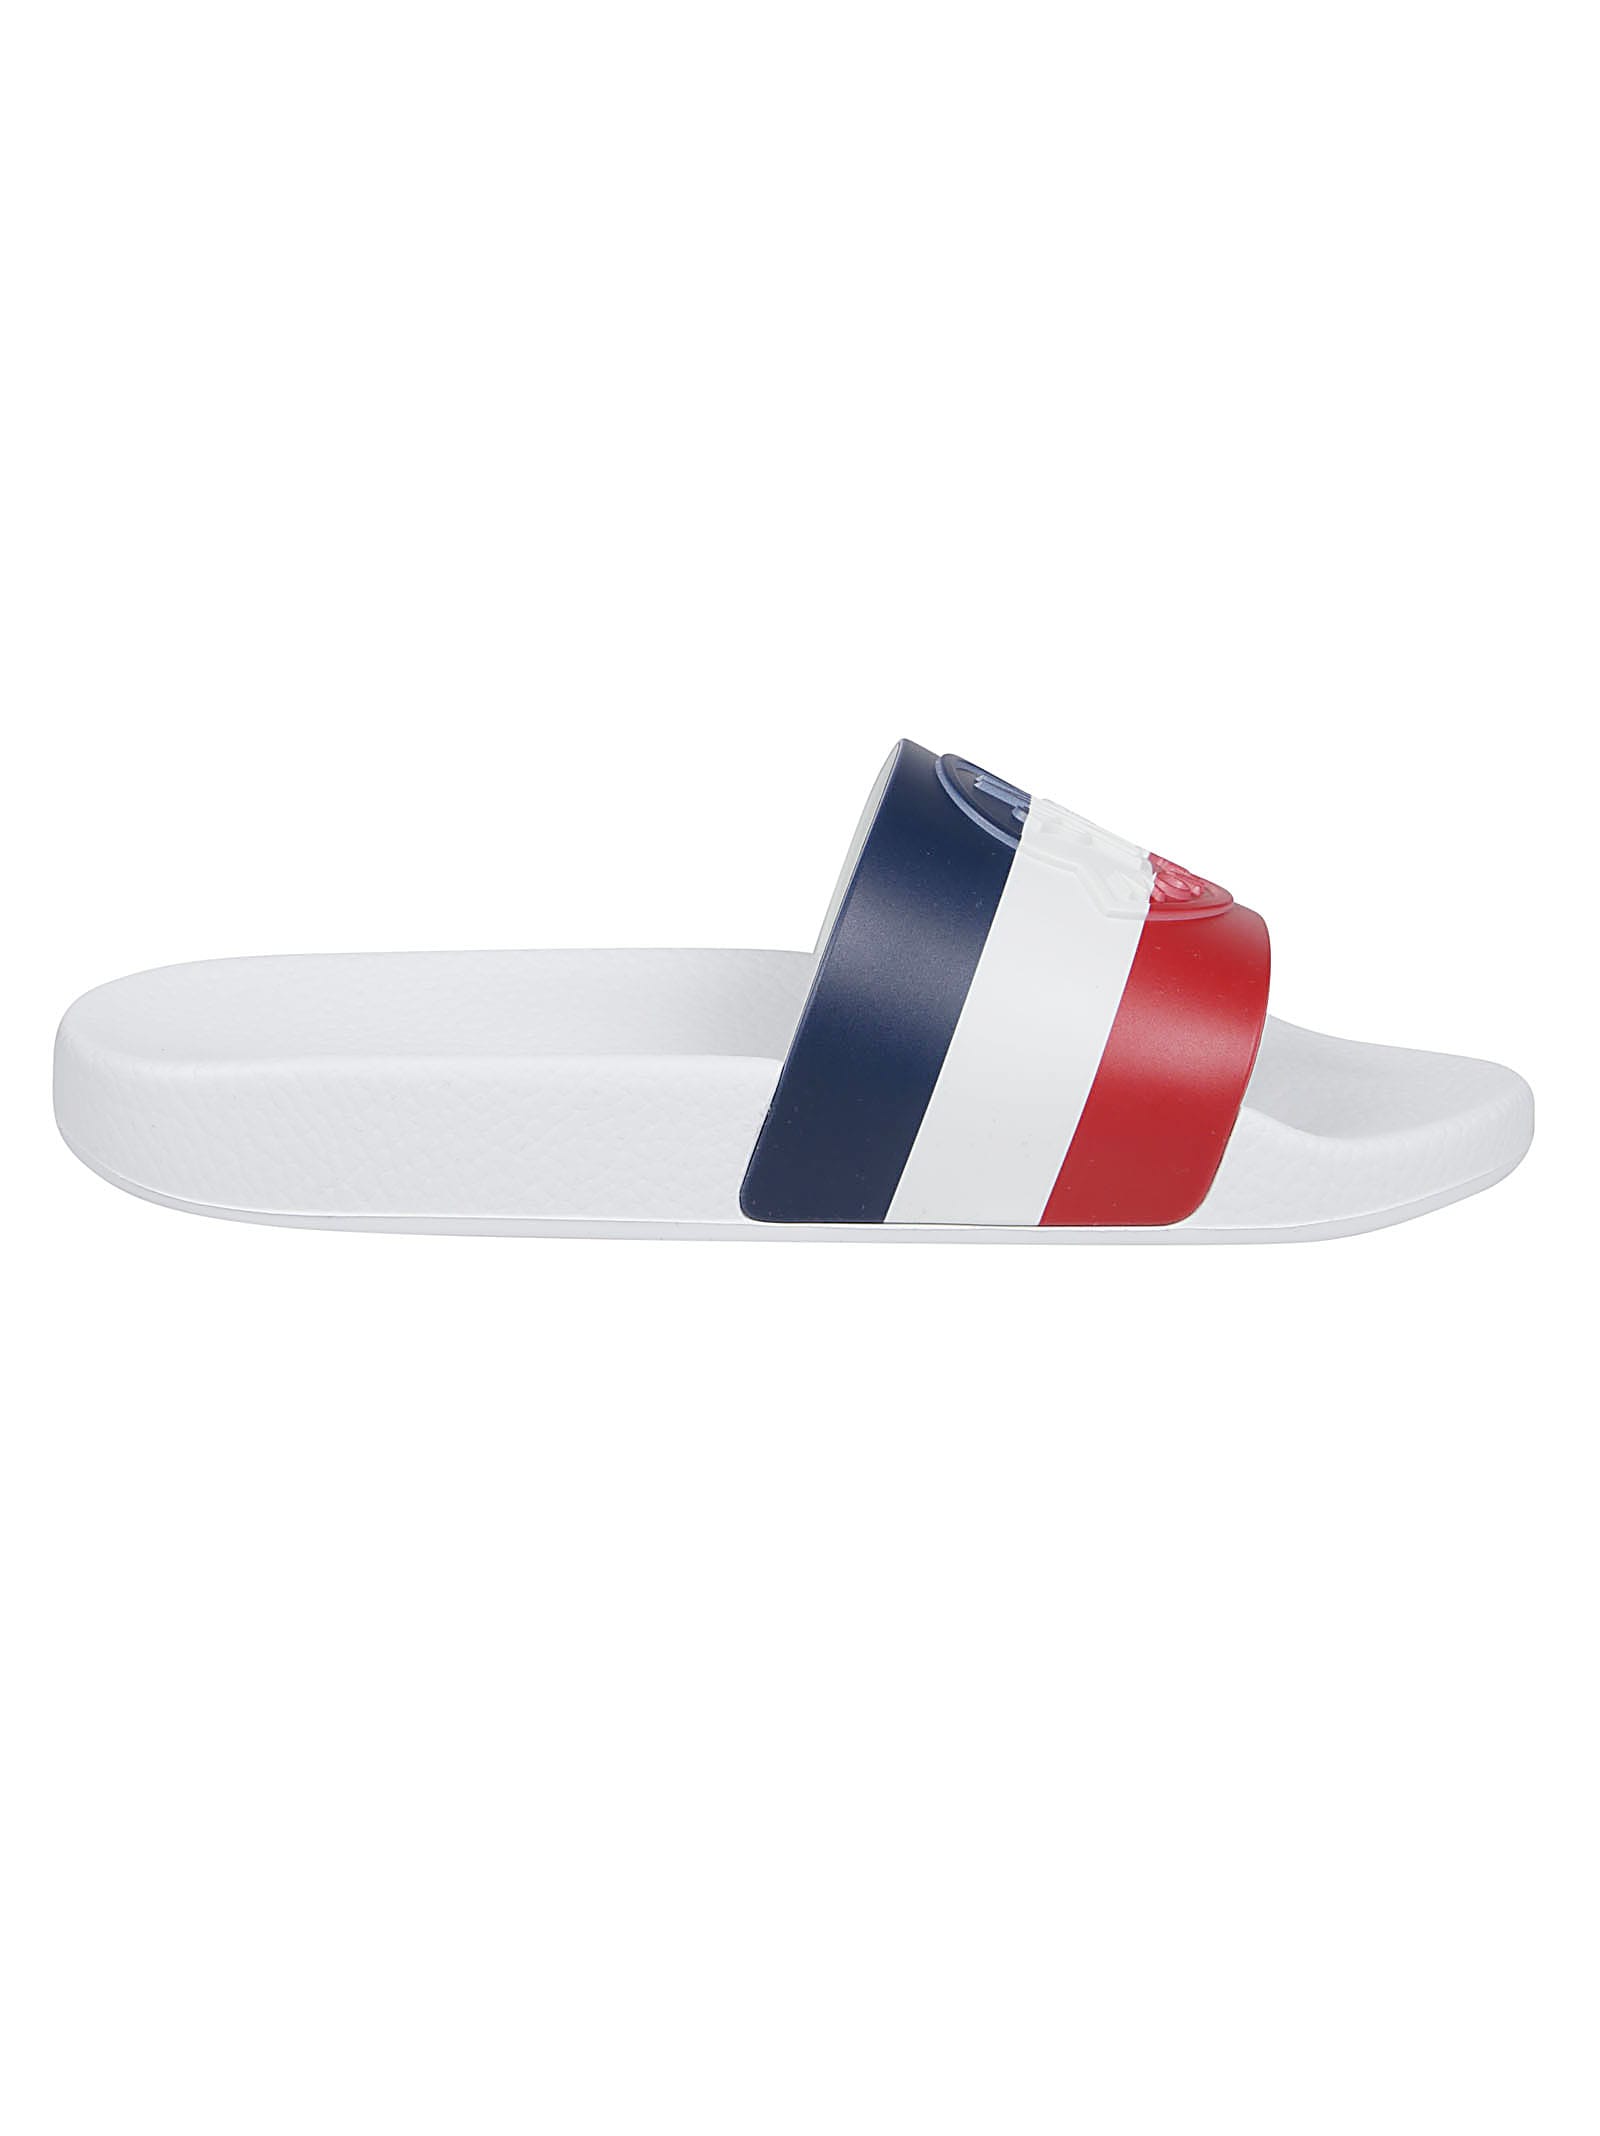 Buy Moncler Slides Jeanne online, shop Moncler shoes with free shipping